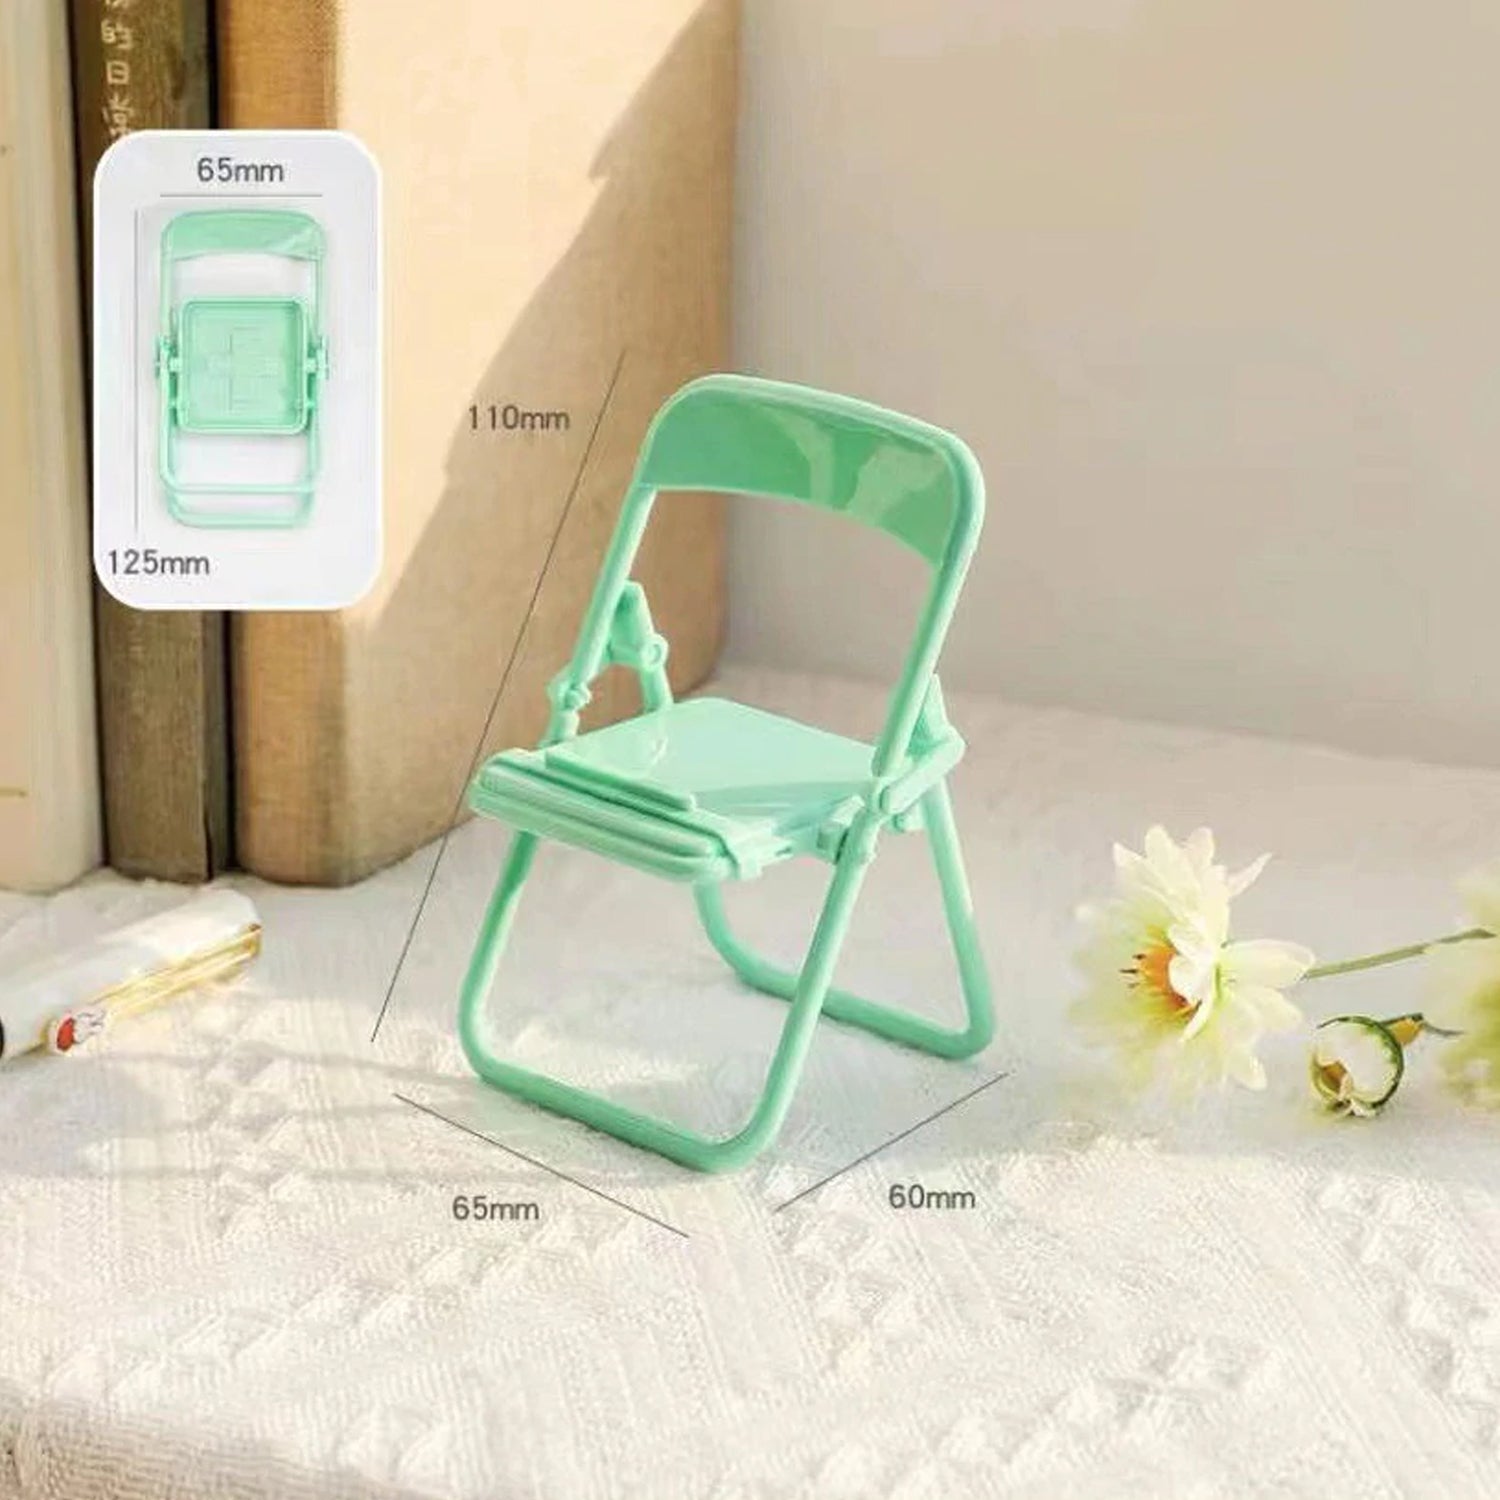 4847 1 Pc Chair Stand With Box As A Mobile Stand For Holding And Supporting Mobile Phones Easily. 